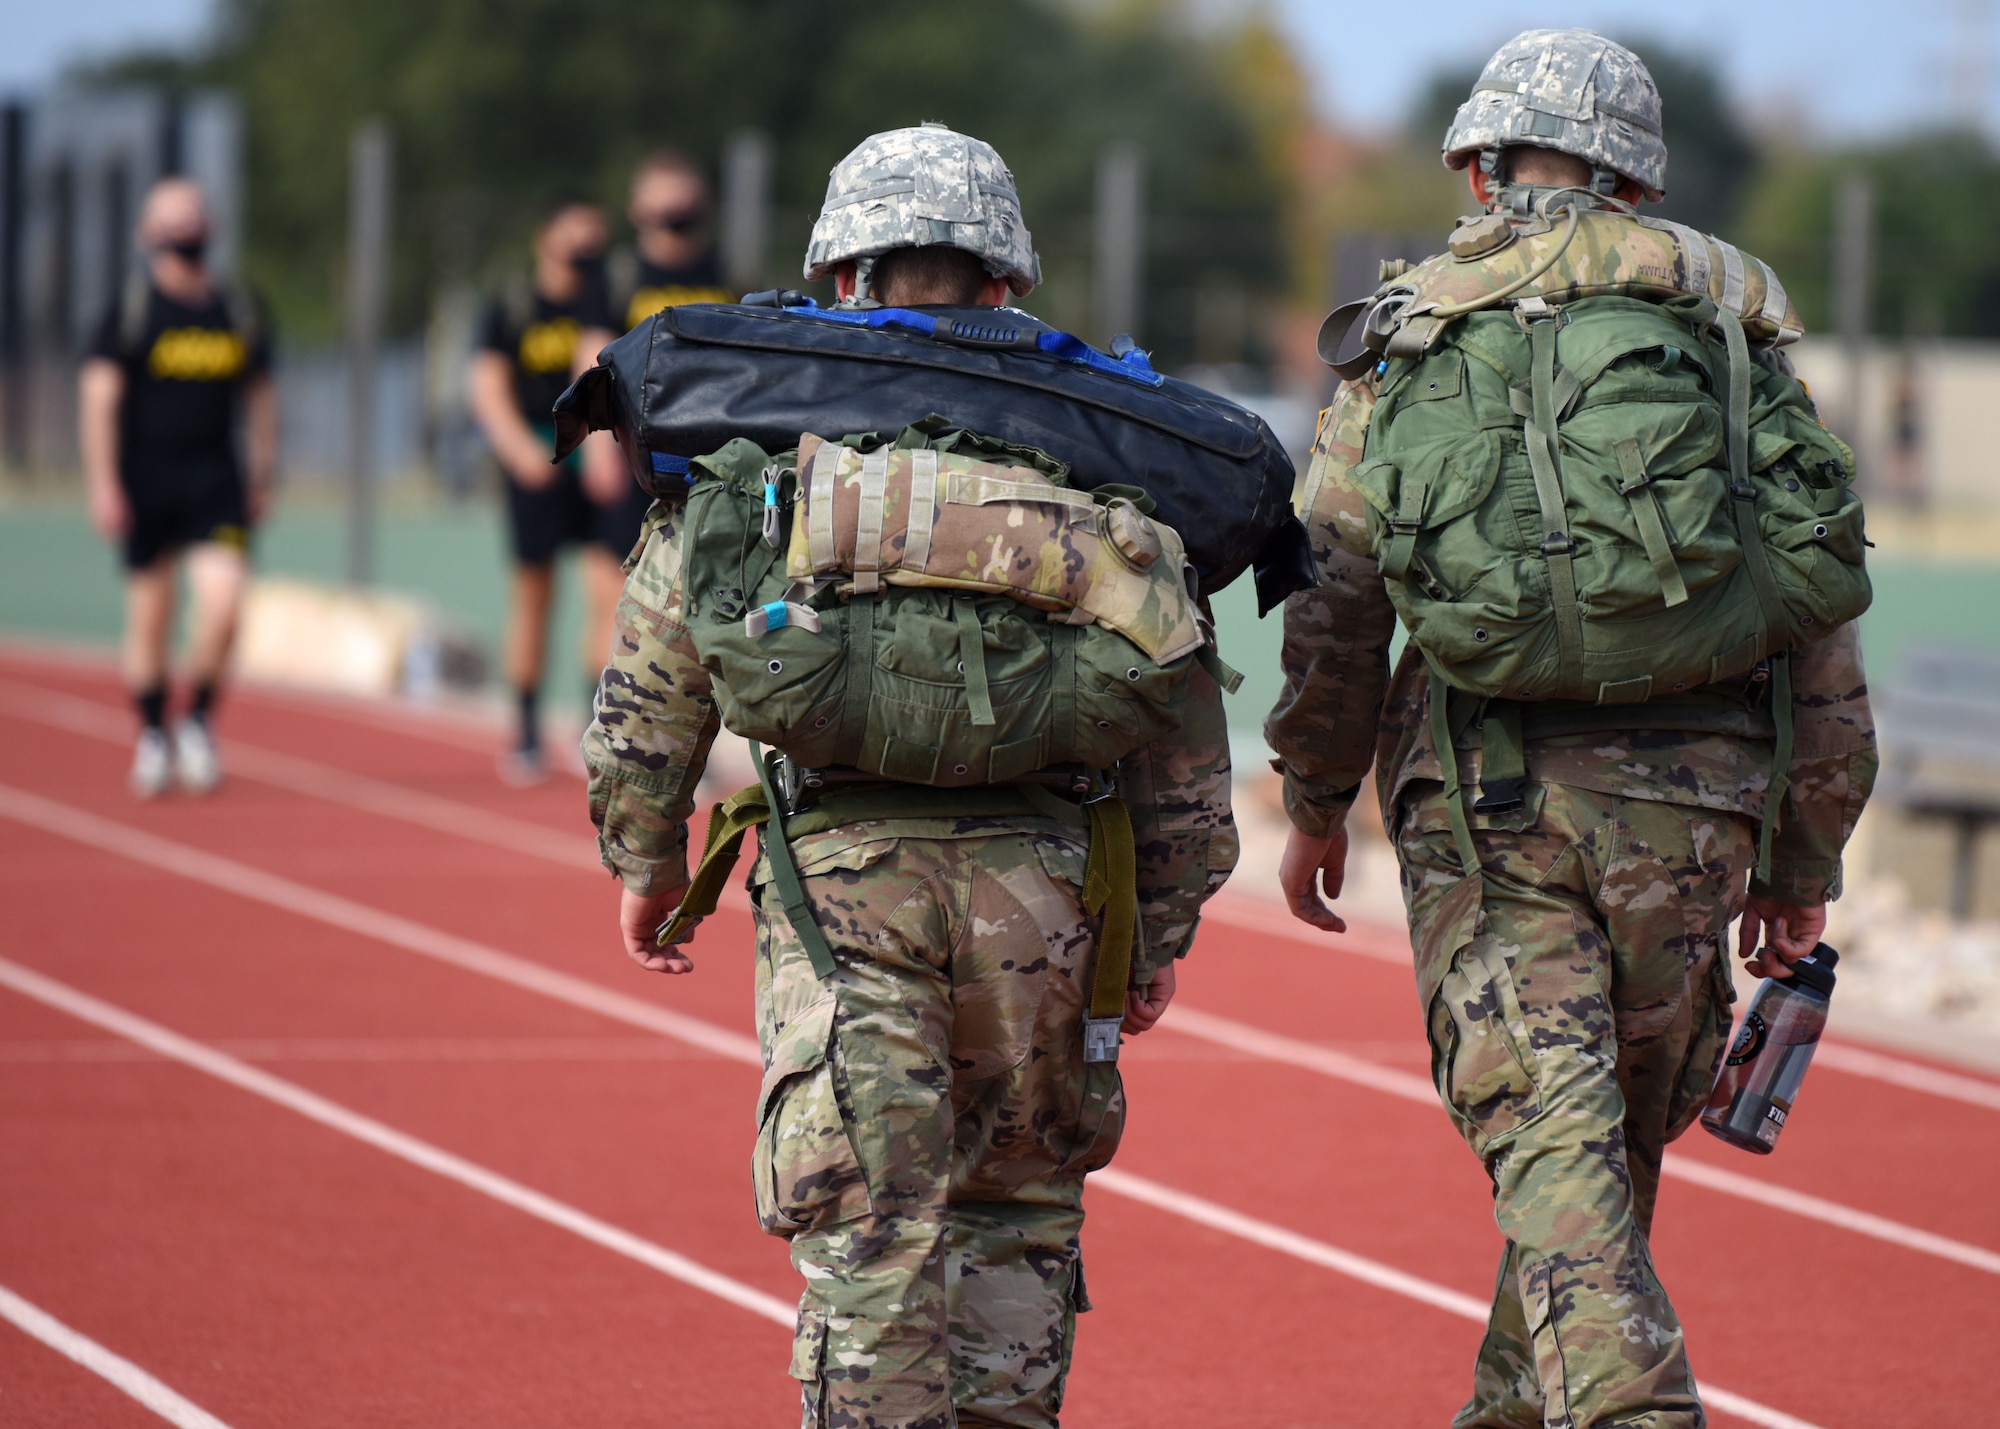 U.S. Army Soldiers ruck around the track during the Prisoner of War and Missing in Action 24 hour remembrance run at the Mathis Fitness Center track on Goodfellow Air Force Base, Texas, Nov. 14, 2020. One Soldier ran for 20 straight hours on his own during the event. (U.S. Air Force photo by Airman 1st Class Ethan Sherwood)